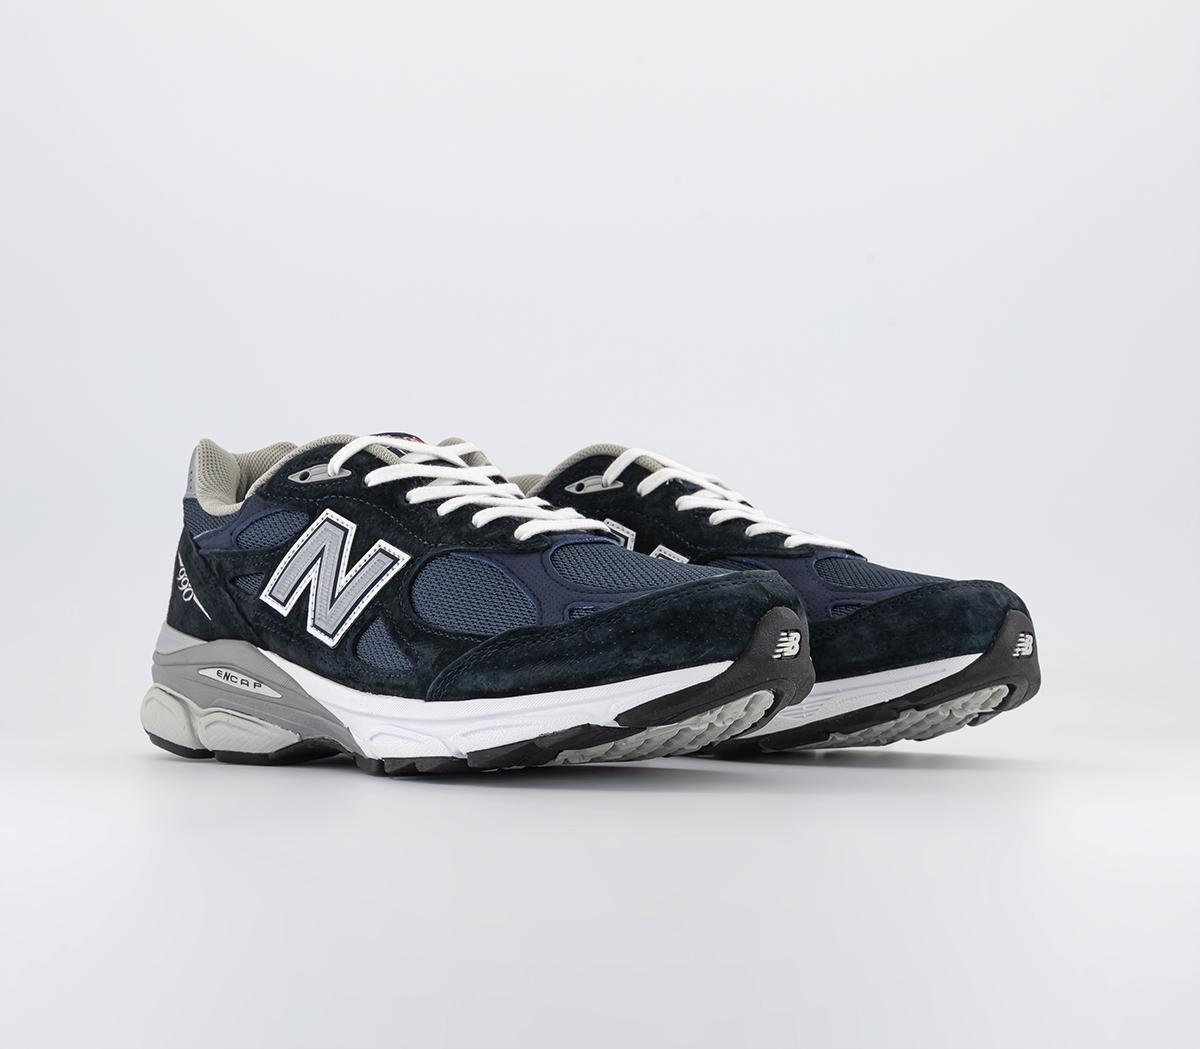 New Balance 990v3 Trainers Navy Grey - Men's Trainers